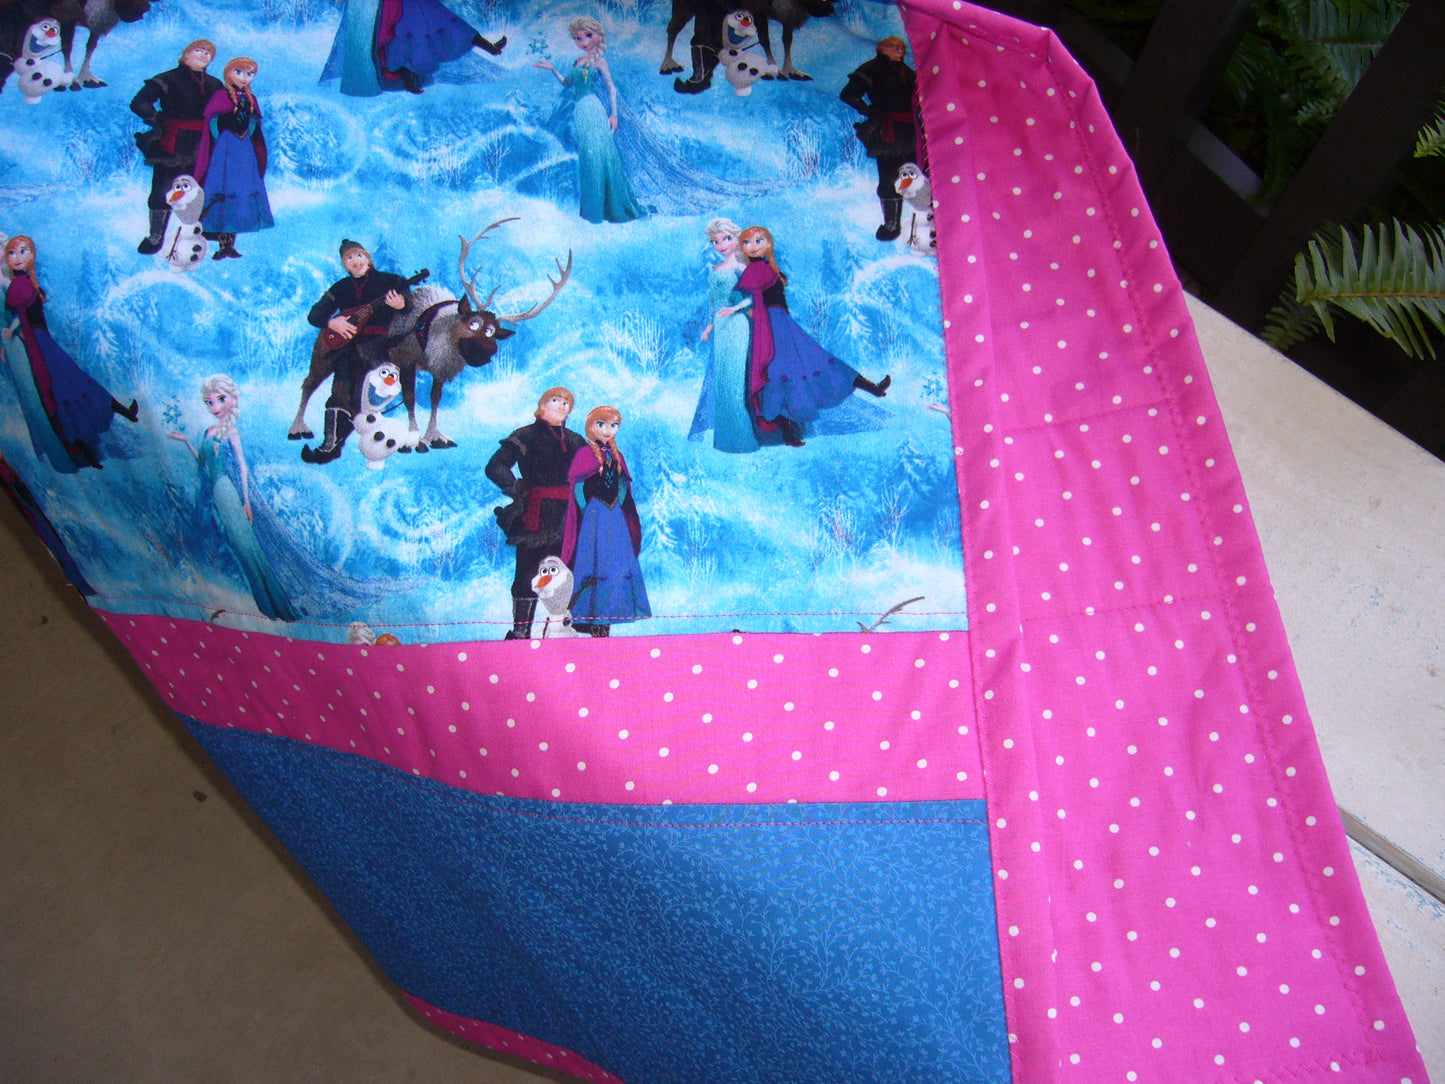 Frozen Sisters inspired Quilt Blanket Baby Nursery Child Toddler Bedding to Adult Lap Blanket